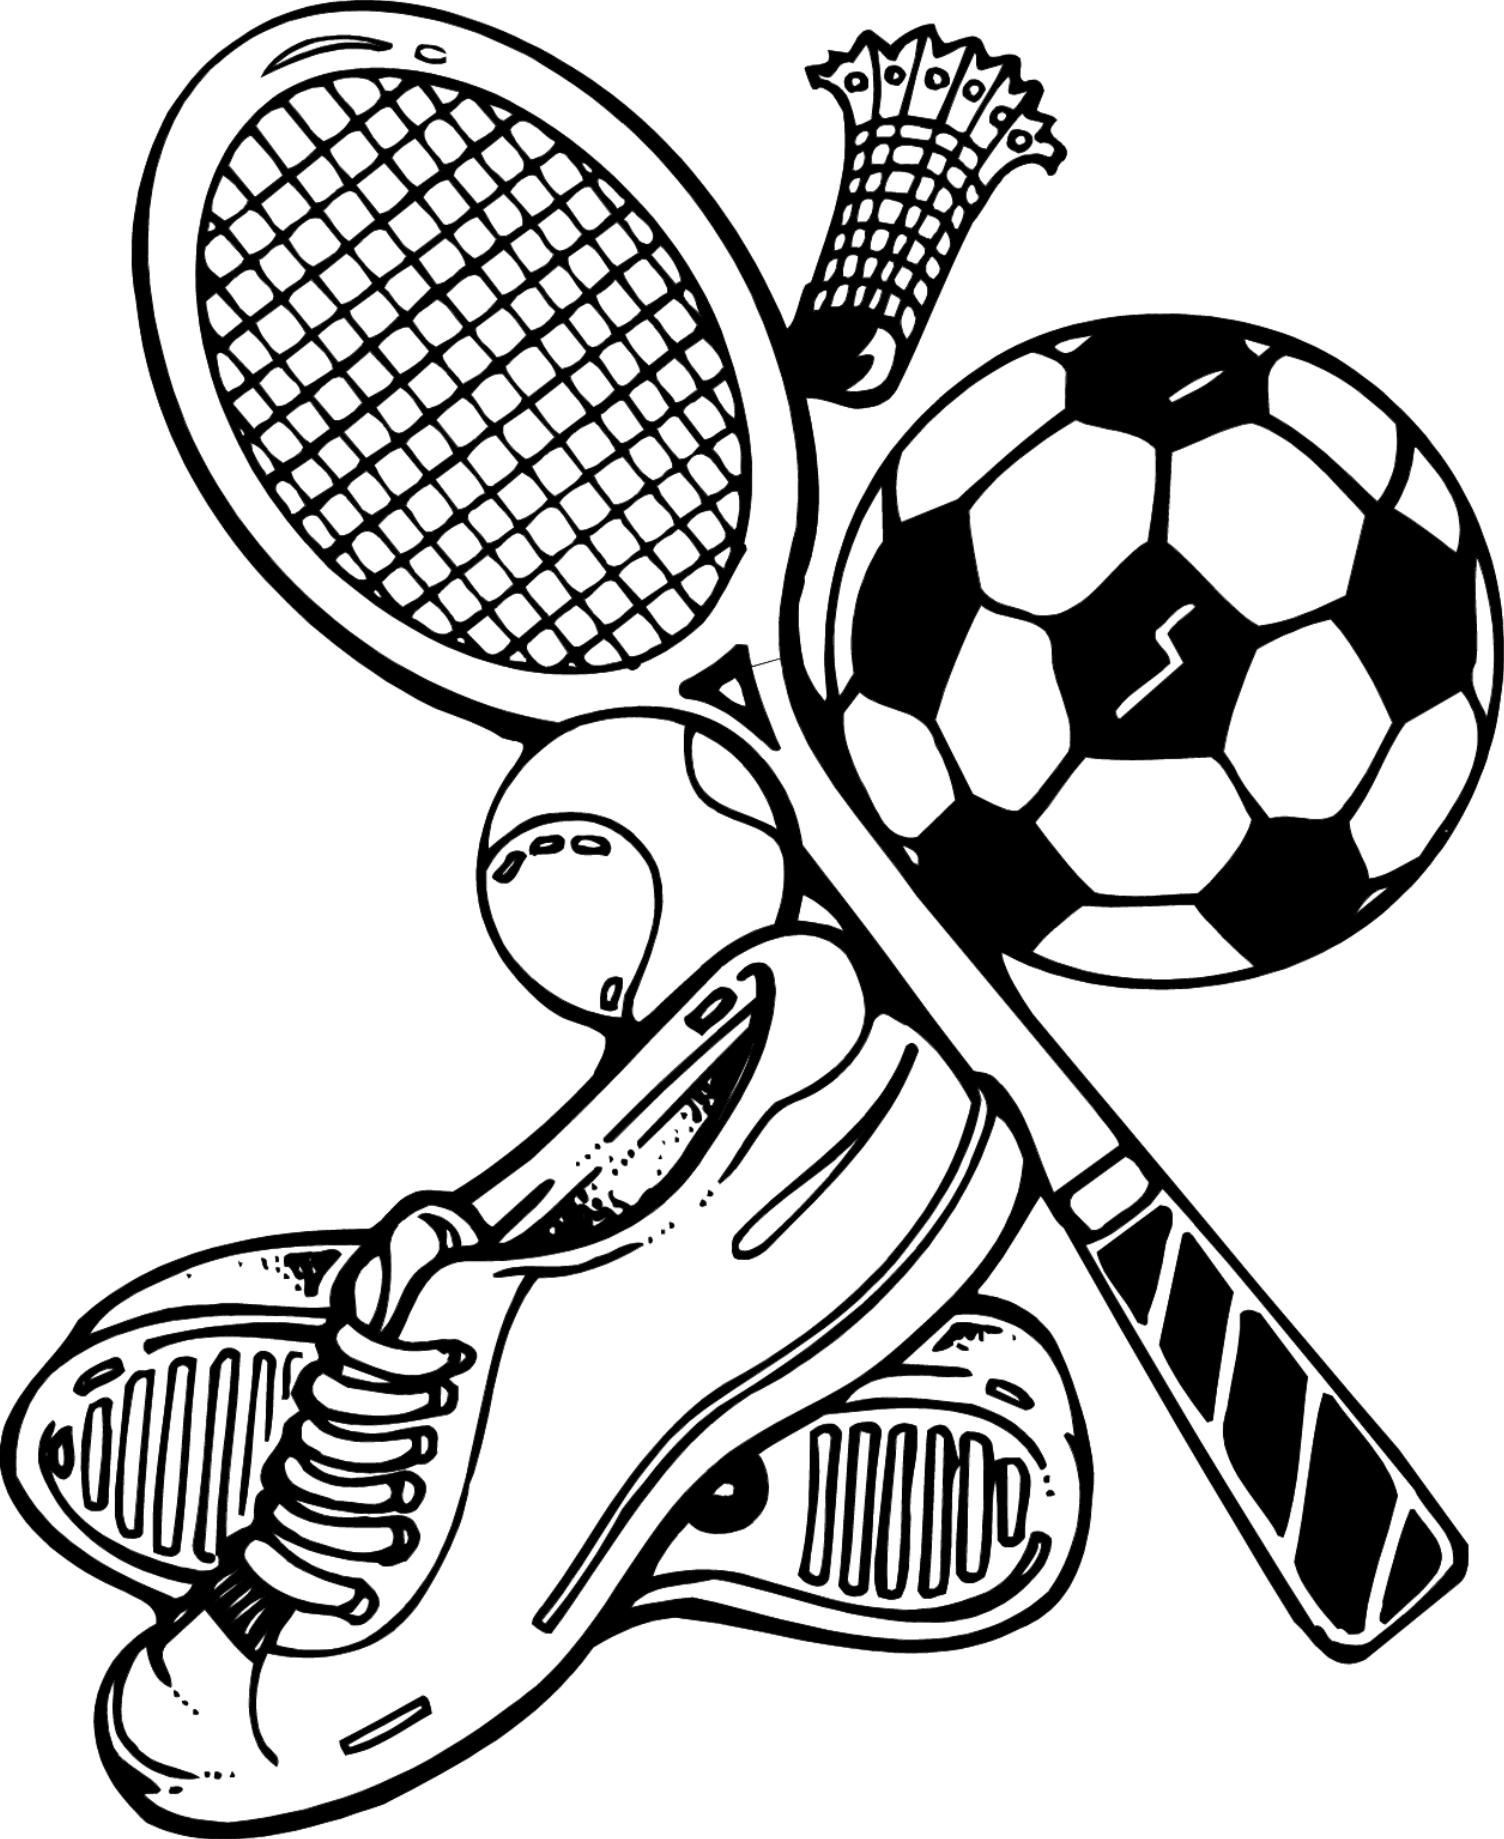 Sports Coloring Pages For Kids
 cool kids sports coloring pages Free Download